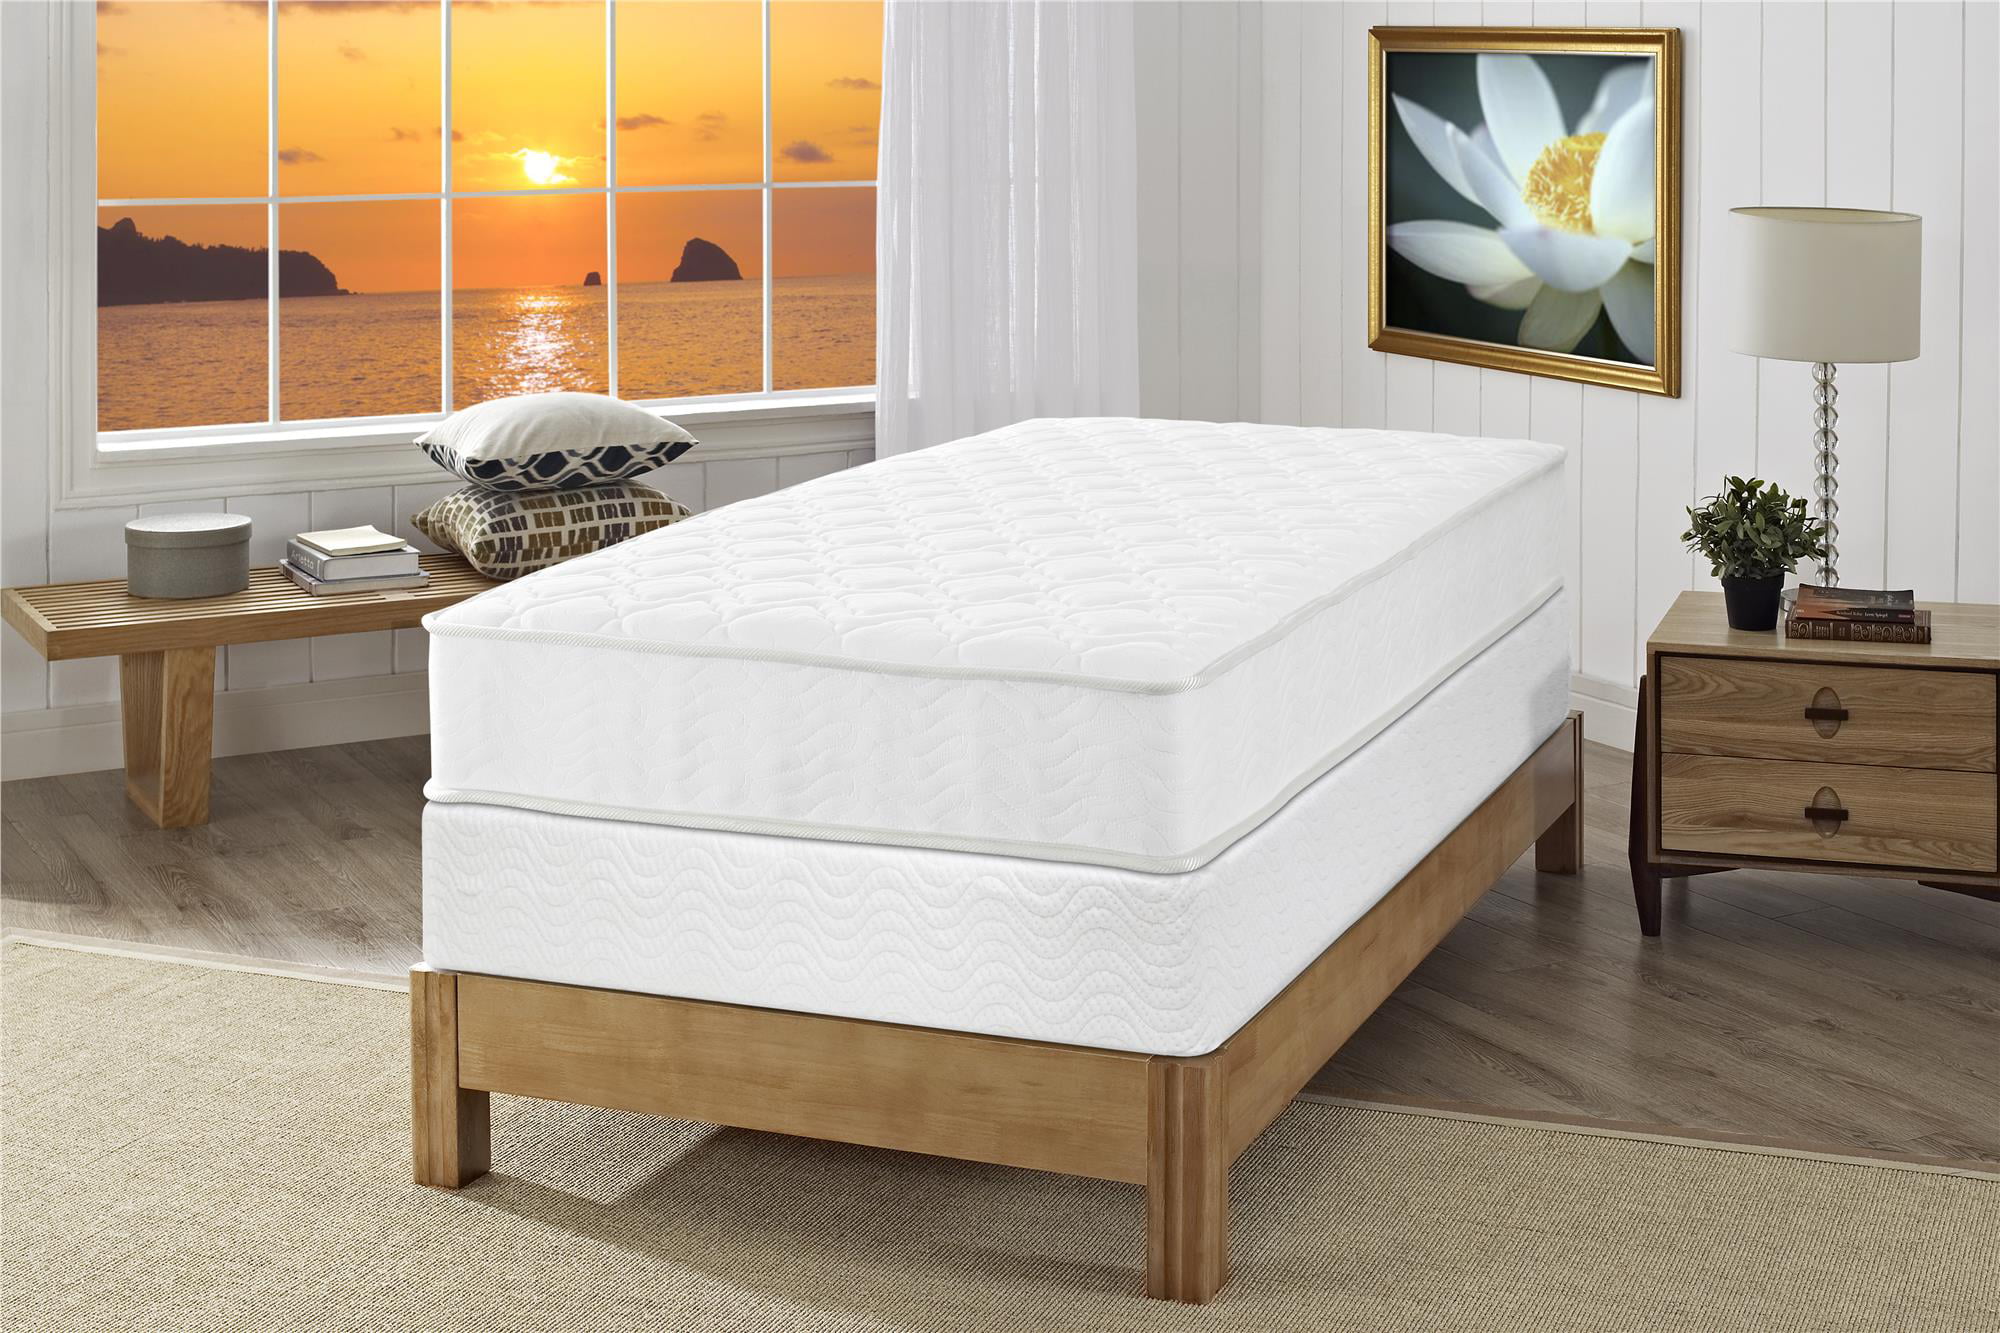 Signature Sleep GOLD Full Size 8 Inch Independently Encased Coil Bed Mattress 